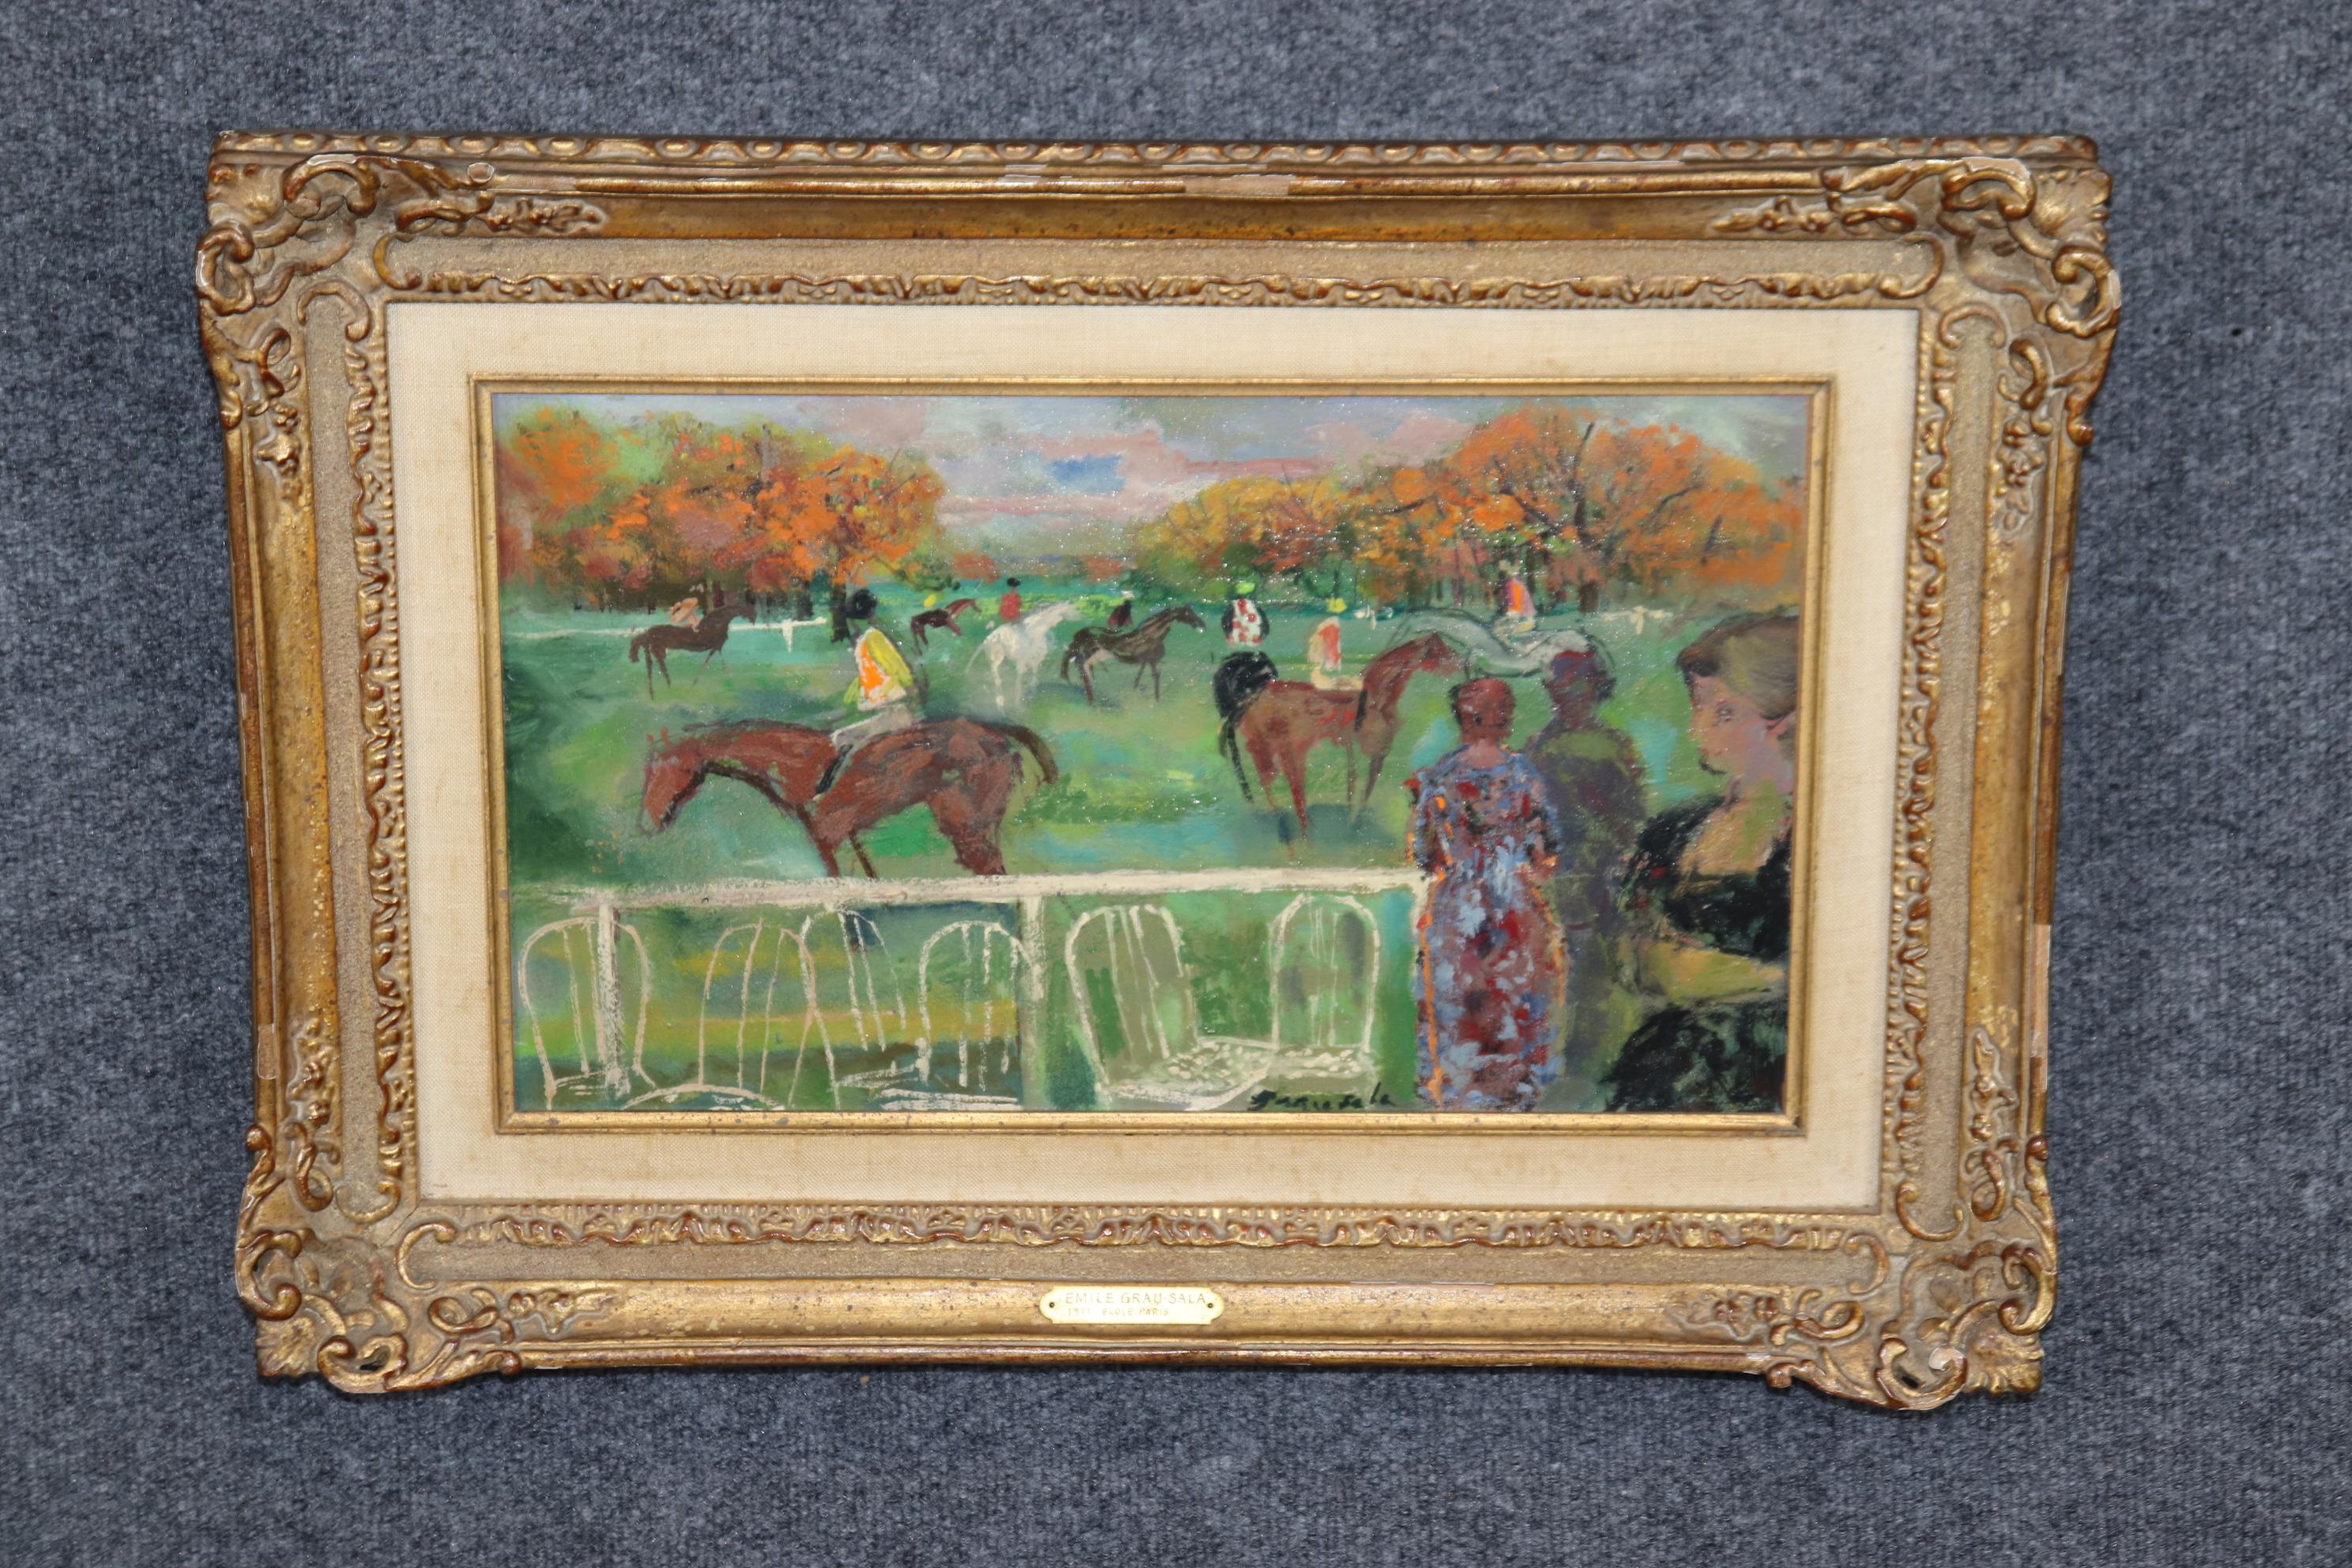 Dimensions (Frame) - H: 17 1/4in  W: 24 3/4in D: 2 3/4in 
Dimensions (Painting) - H: 10 1/4in W: 17 3/4in 

This French Oil Panting on Canvas of Horse Scene By Emile Grau Sala is truly spectacular and of museum quality! If you look at the photos